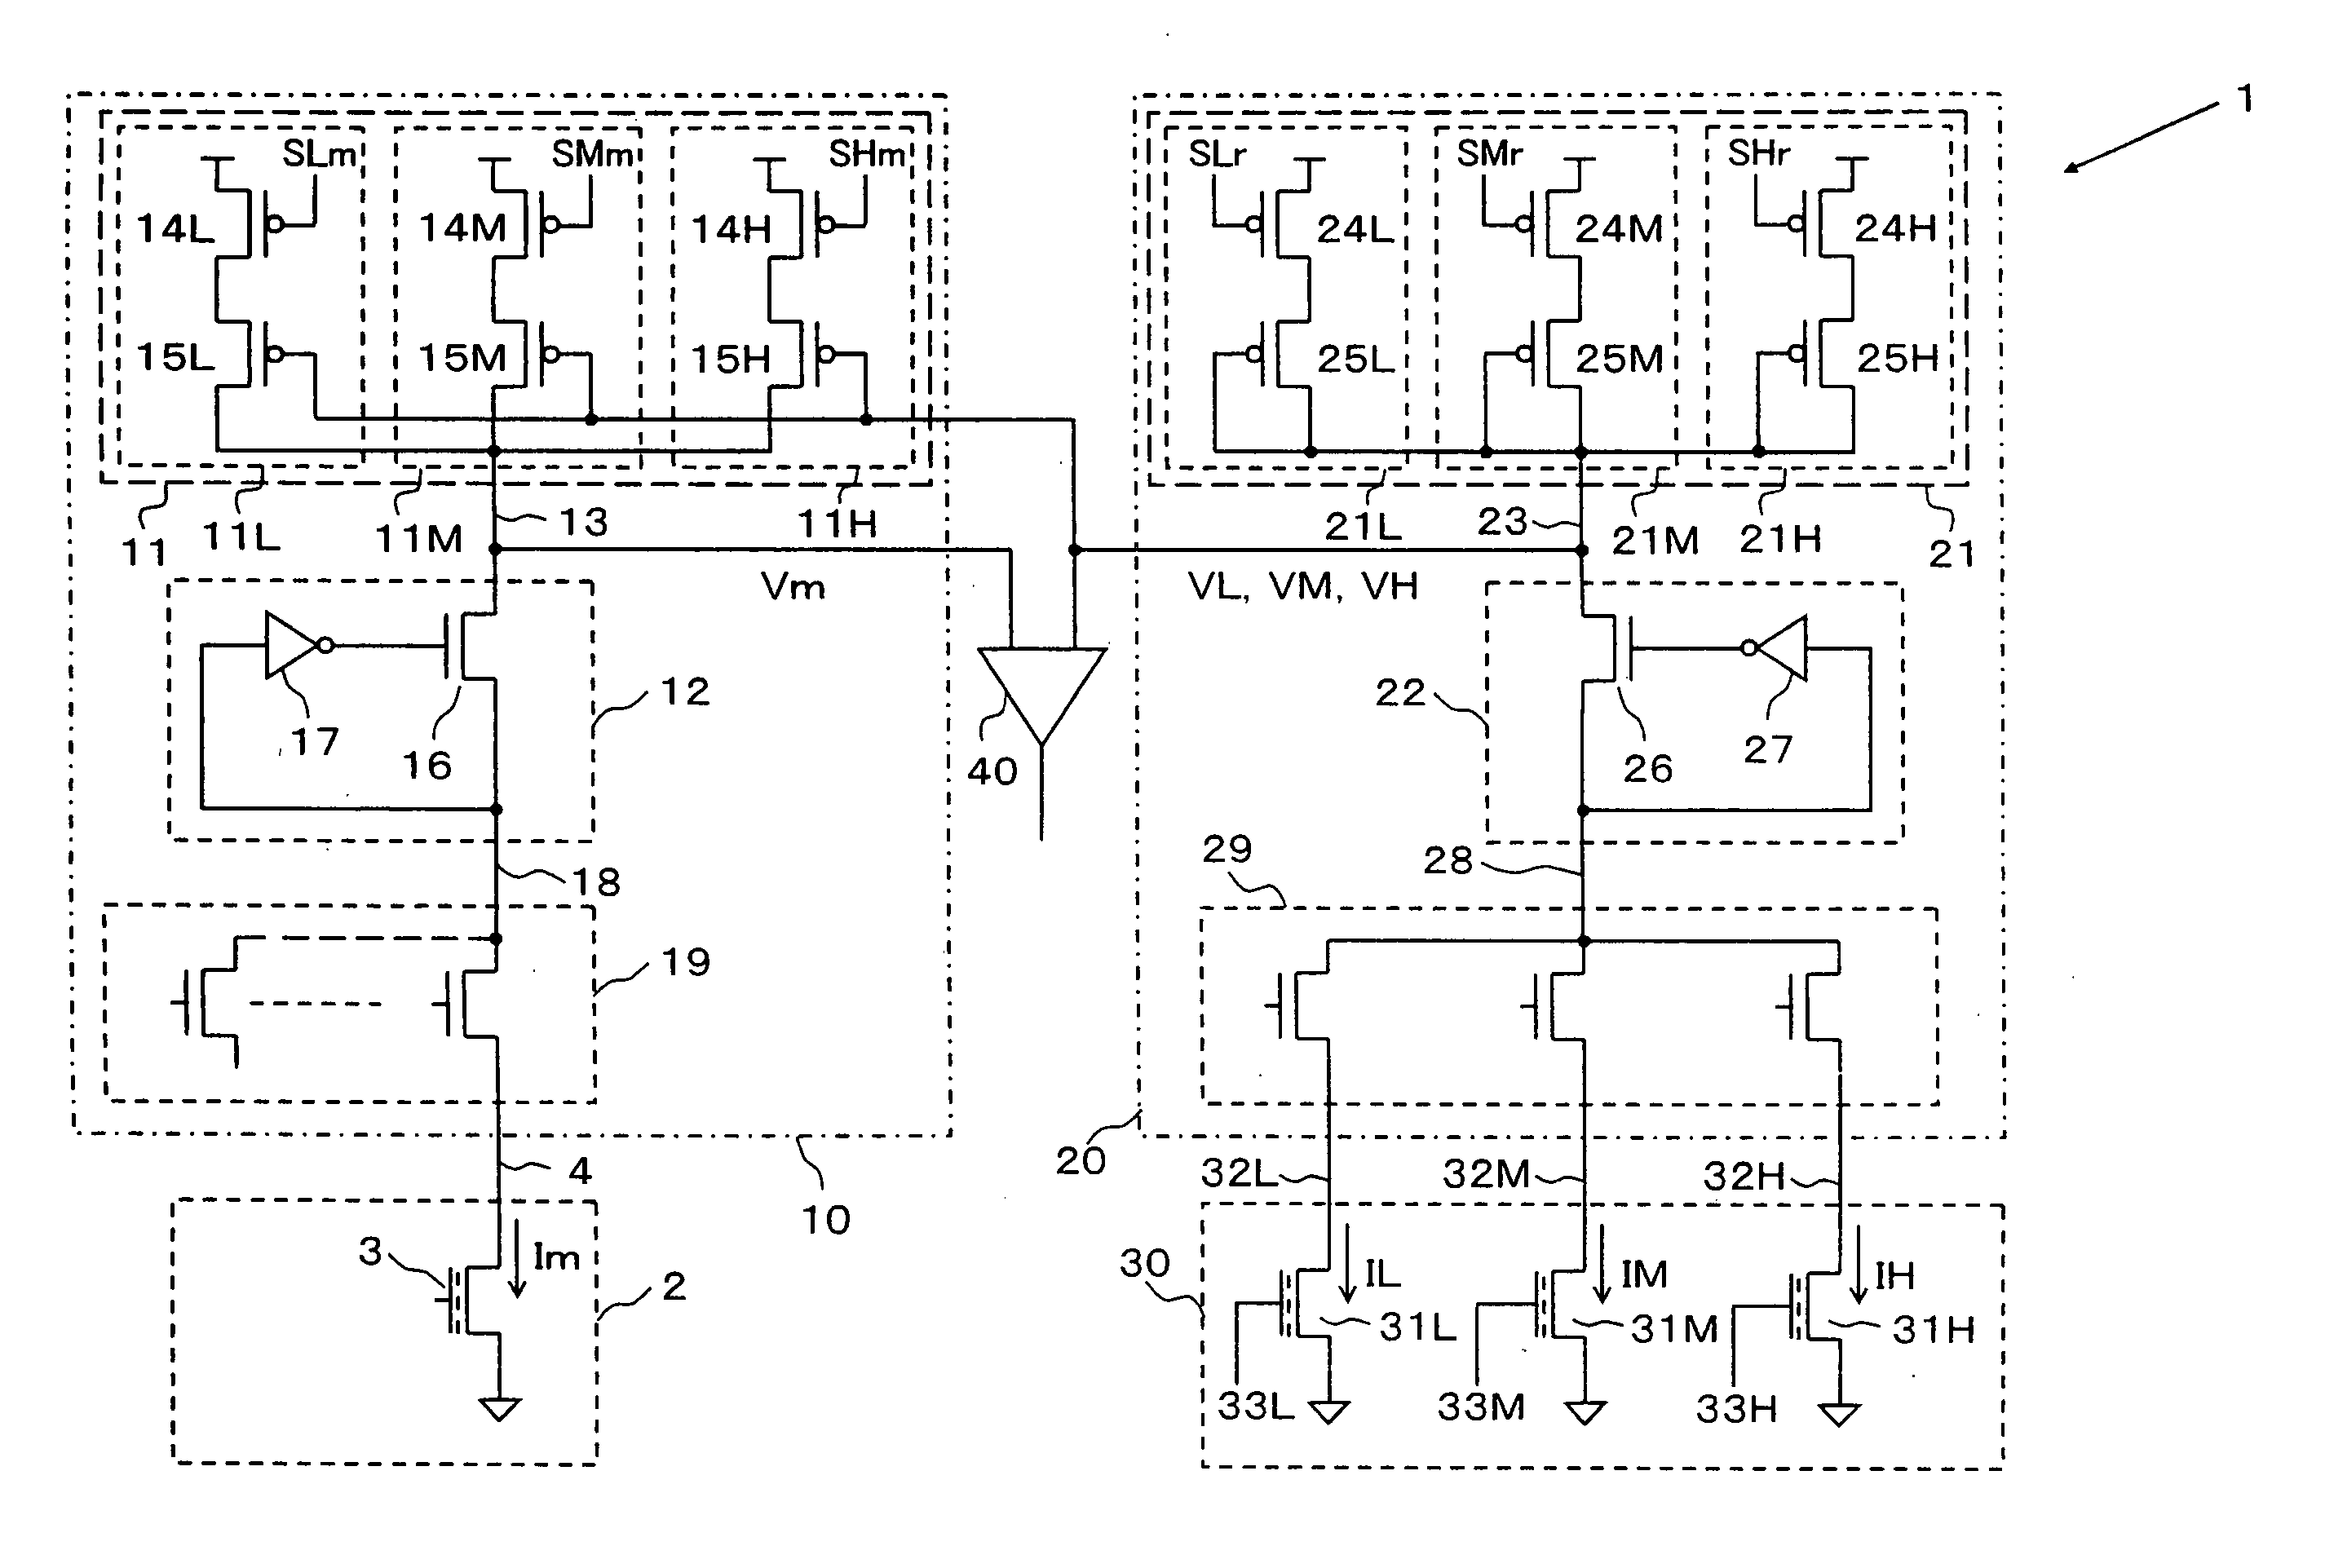 Read-out circuit in semiconductor memory device